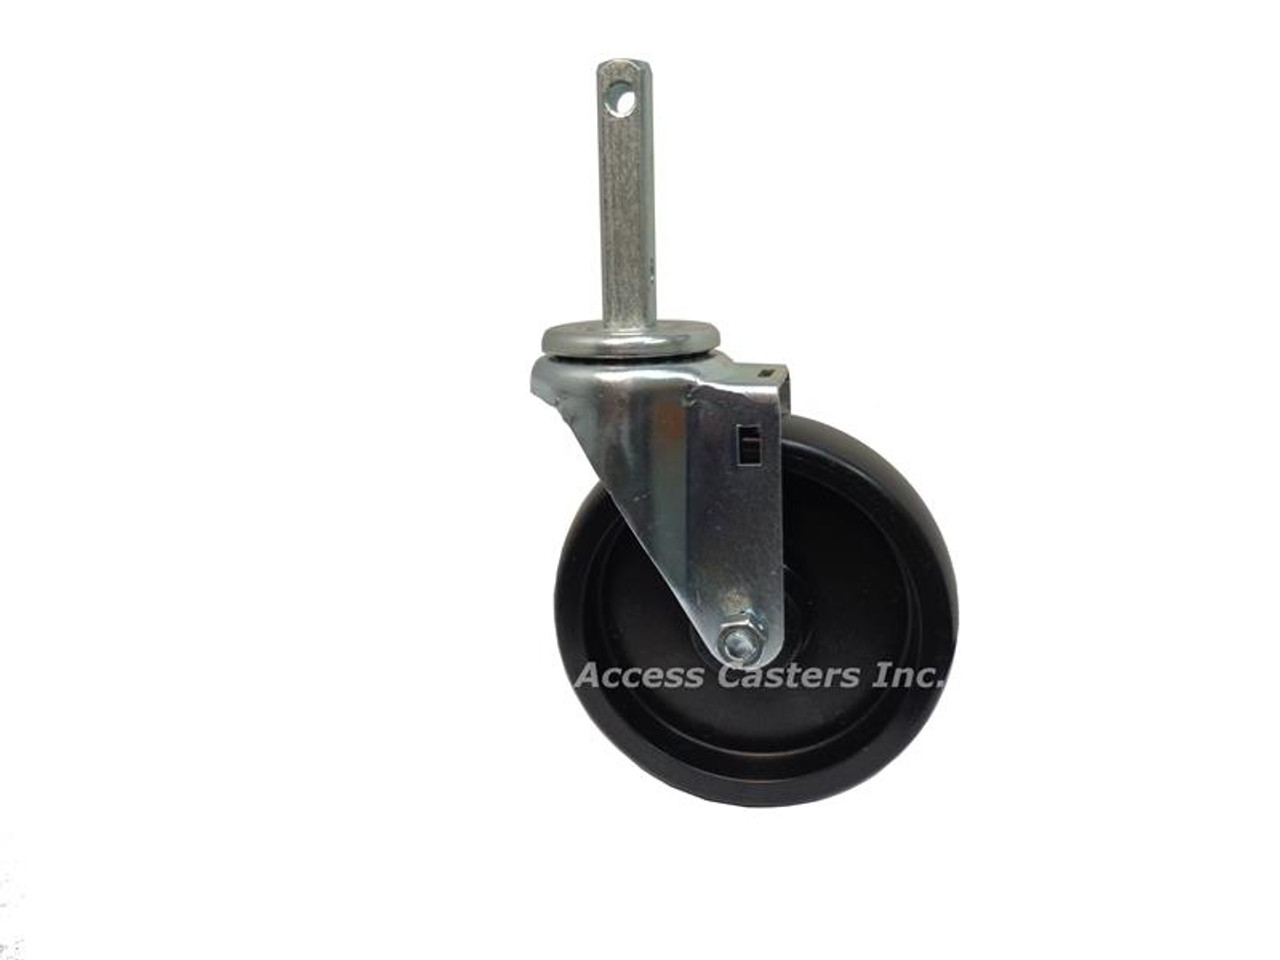 09138-AC 5 Inch replacement caster for Lakeside carts